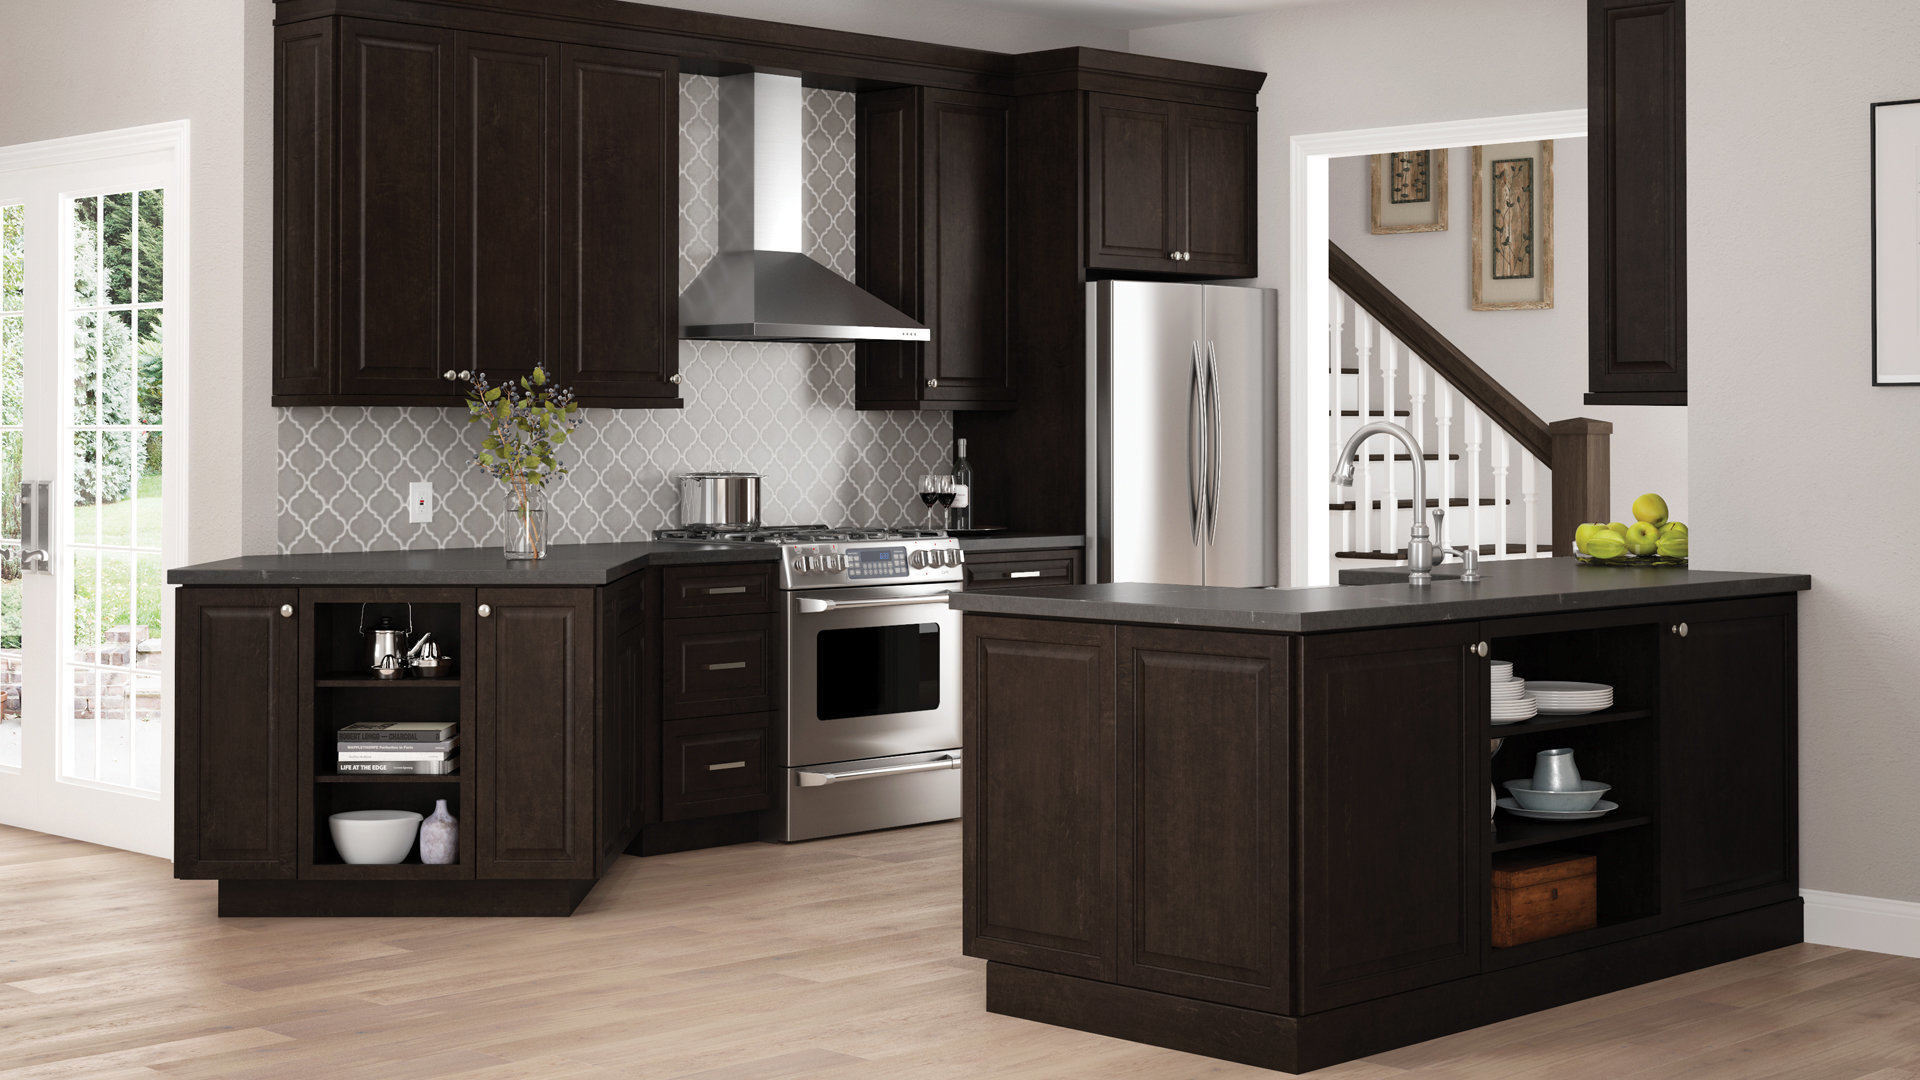 Gretna Base Cabinets In Espresso, Stand Alone Kitchen Cabinets Home Depot